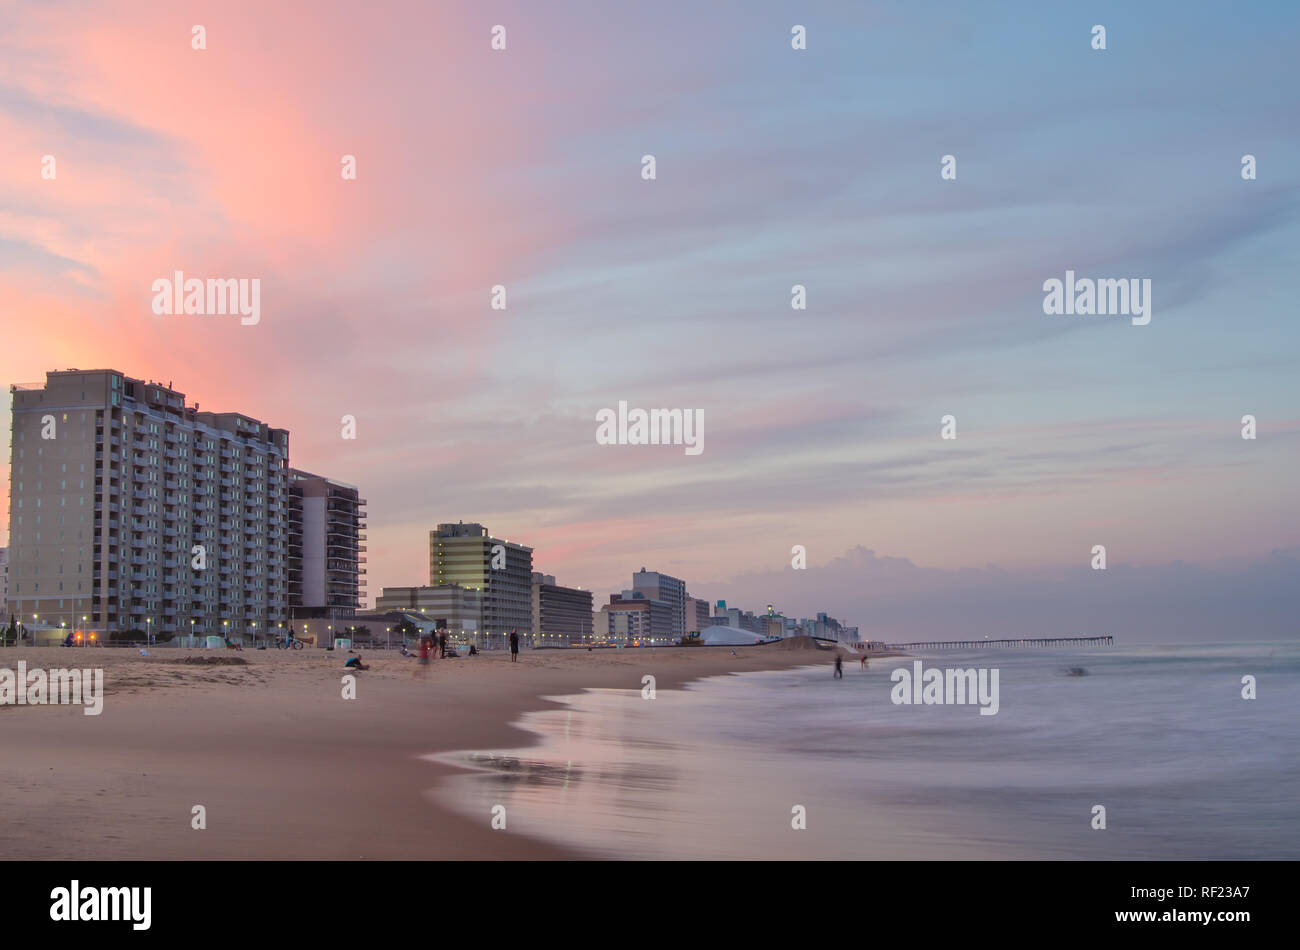 Vacation hotels along the beach at sunset in Virginia Beach, Virginia Stock Photo